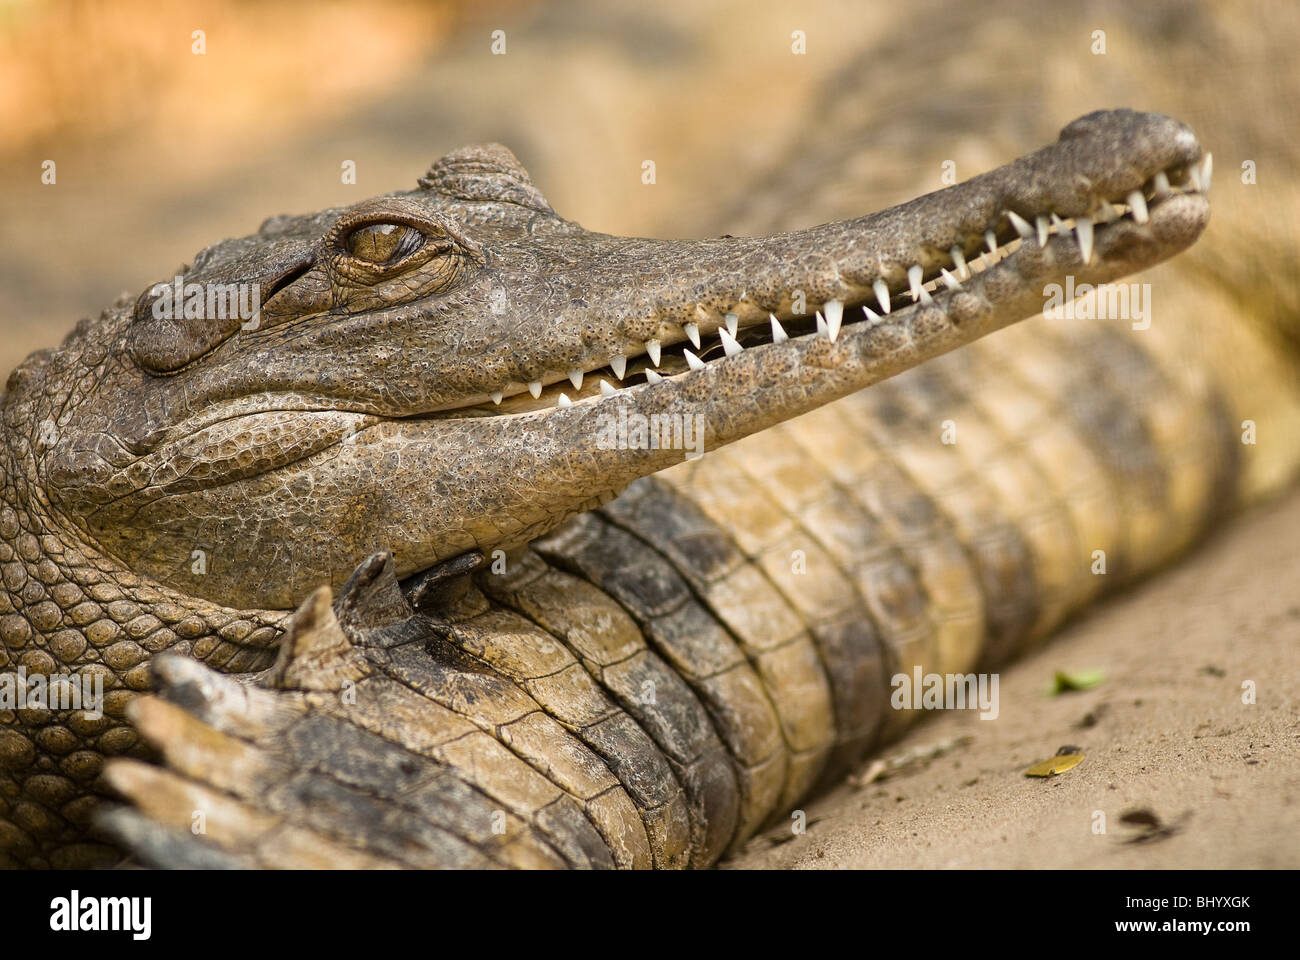 Slender snouted crocodile on the tail of another crocodile, St Lucia, Kwazulu Natal, South Africa Stock Photo